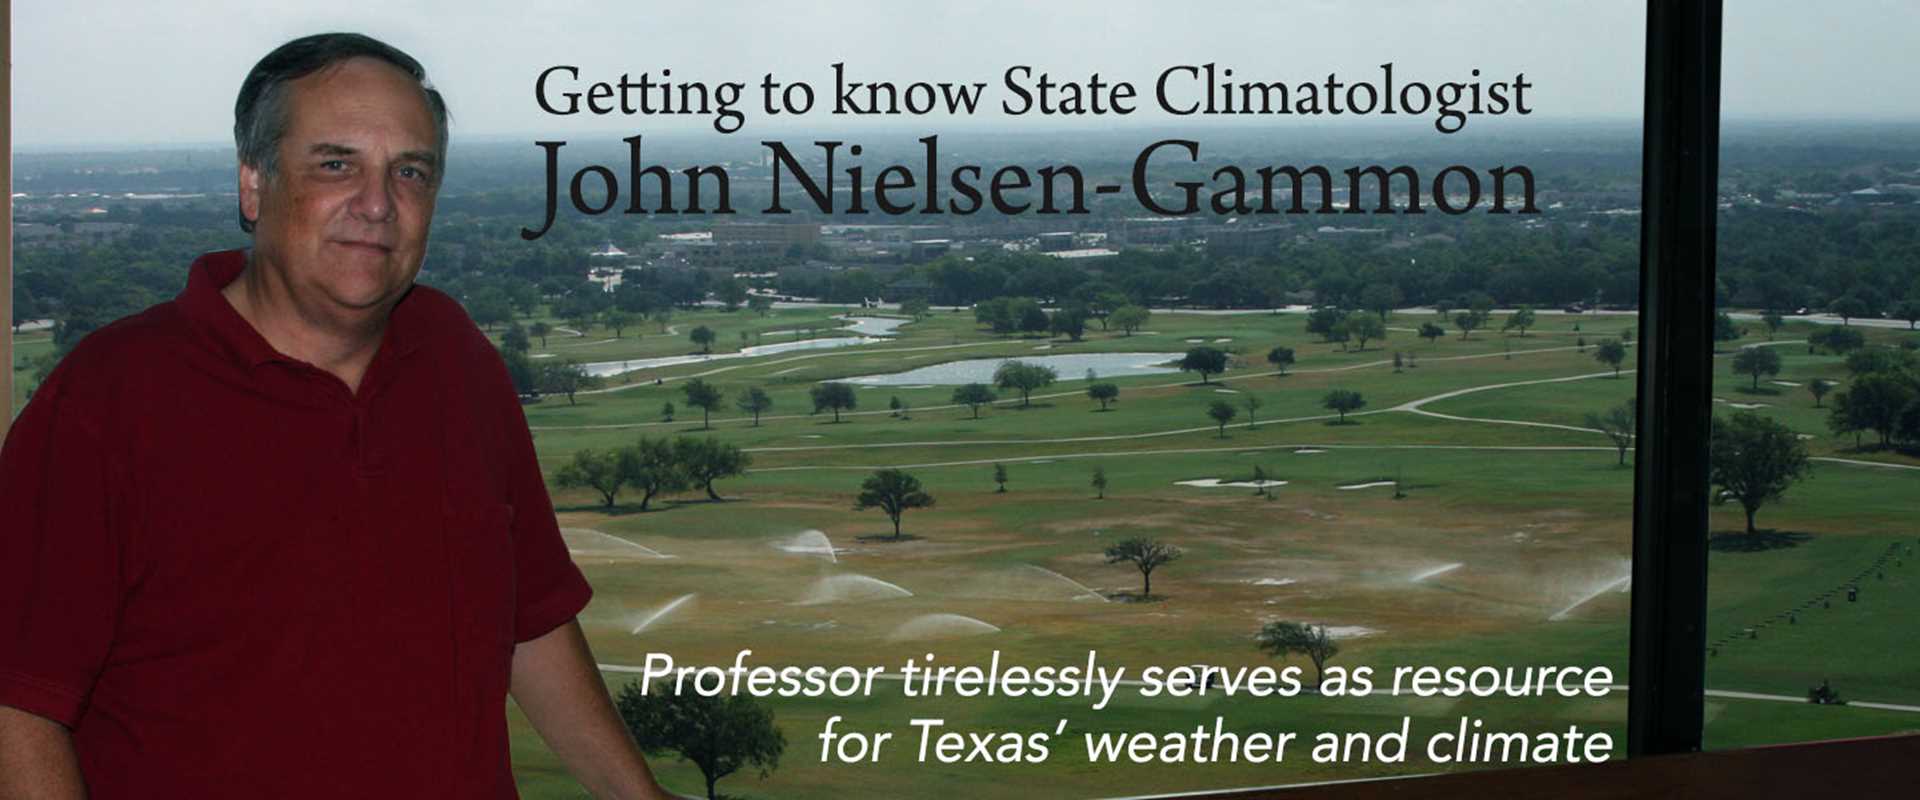 Getting to know State Climatologist John Nielsen-Gammon